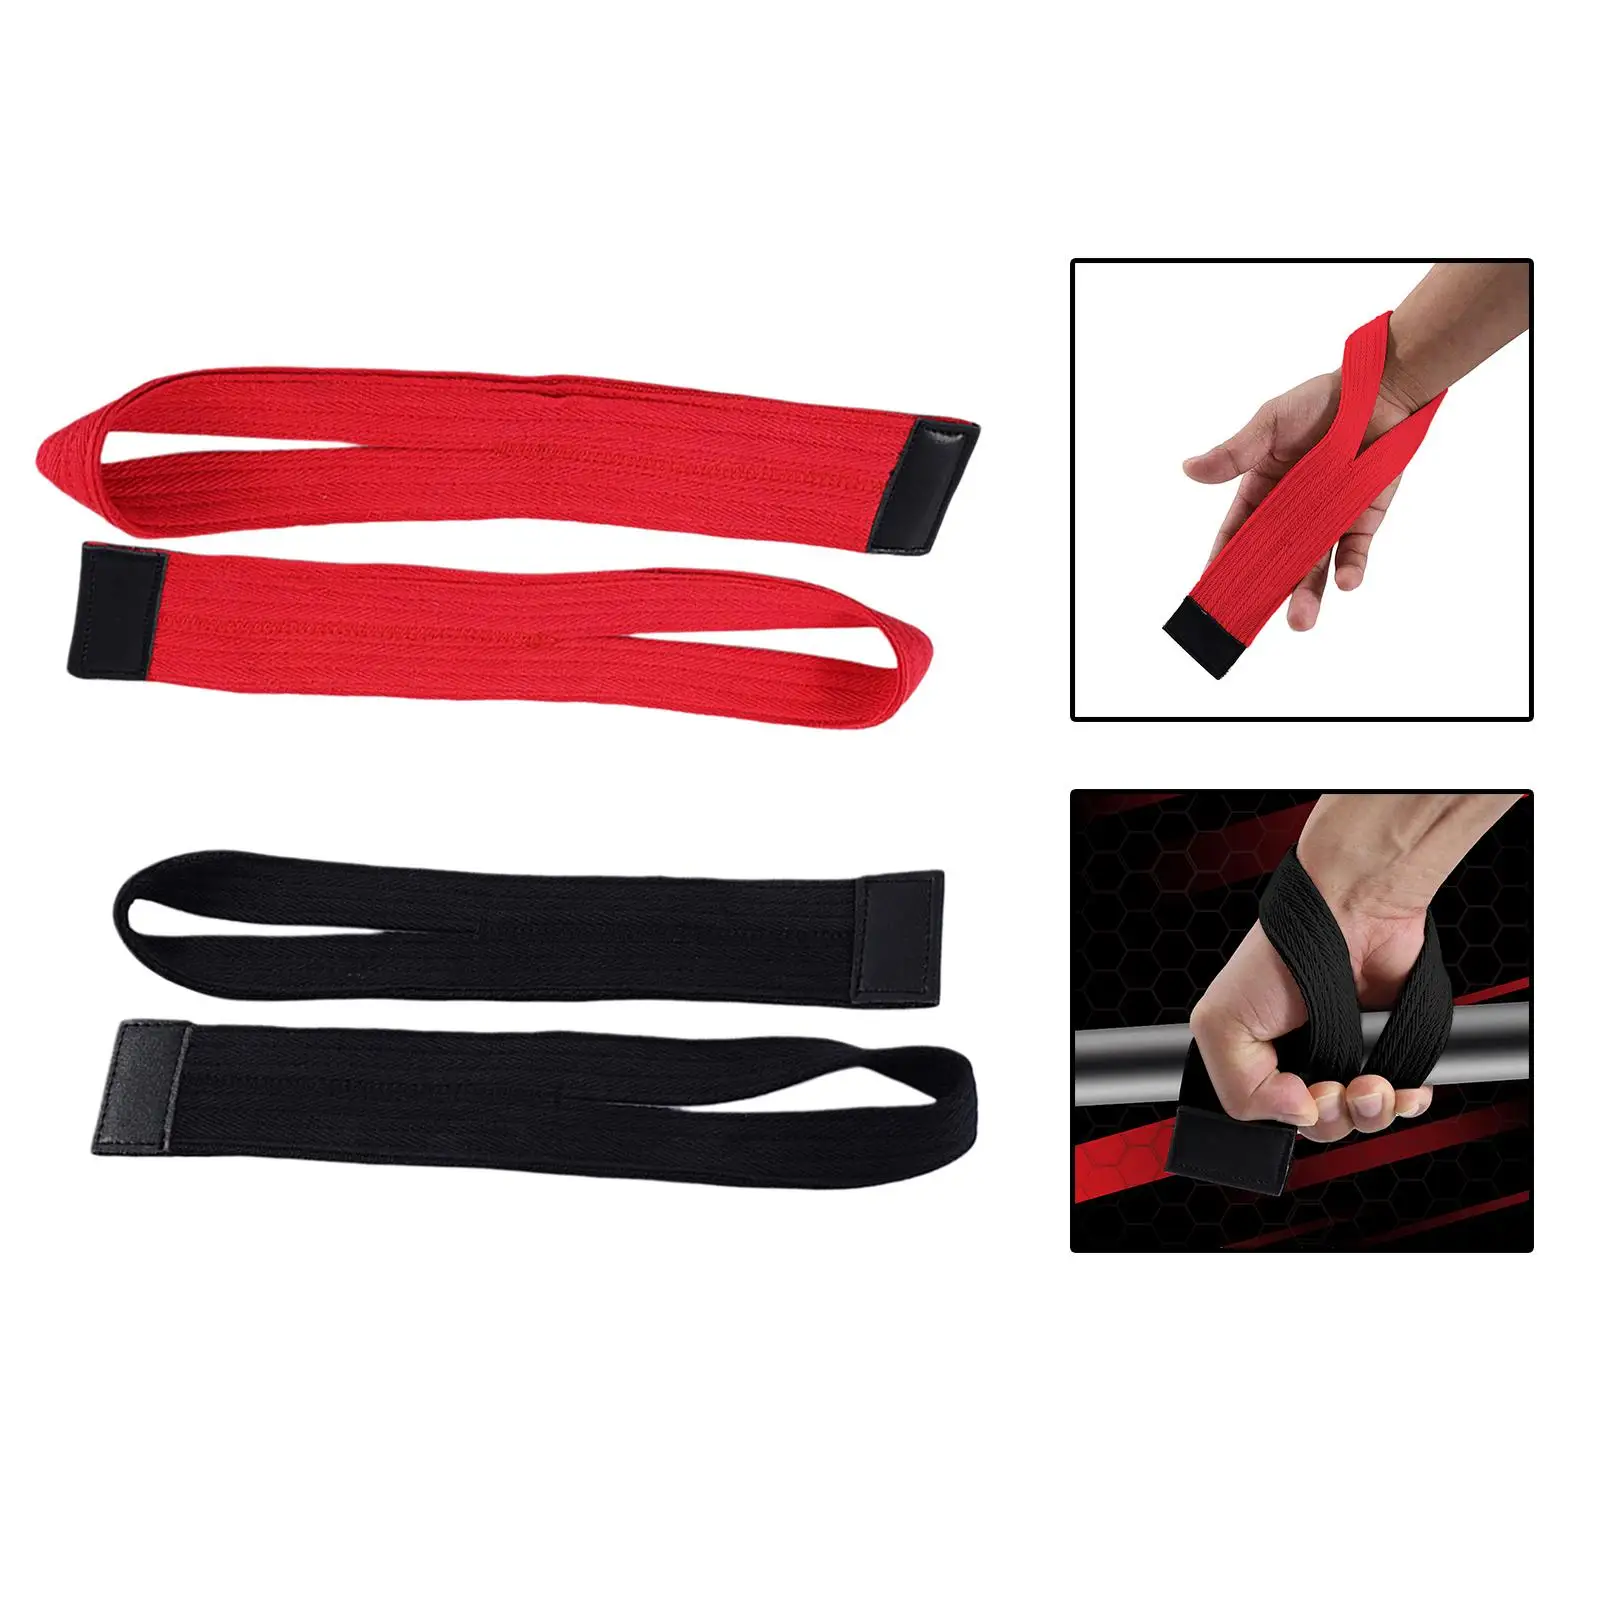 4Pcs Lifting Wrist Straps Barbells Power Protector for Powerlifting Strength Training Unisex